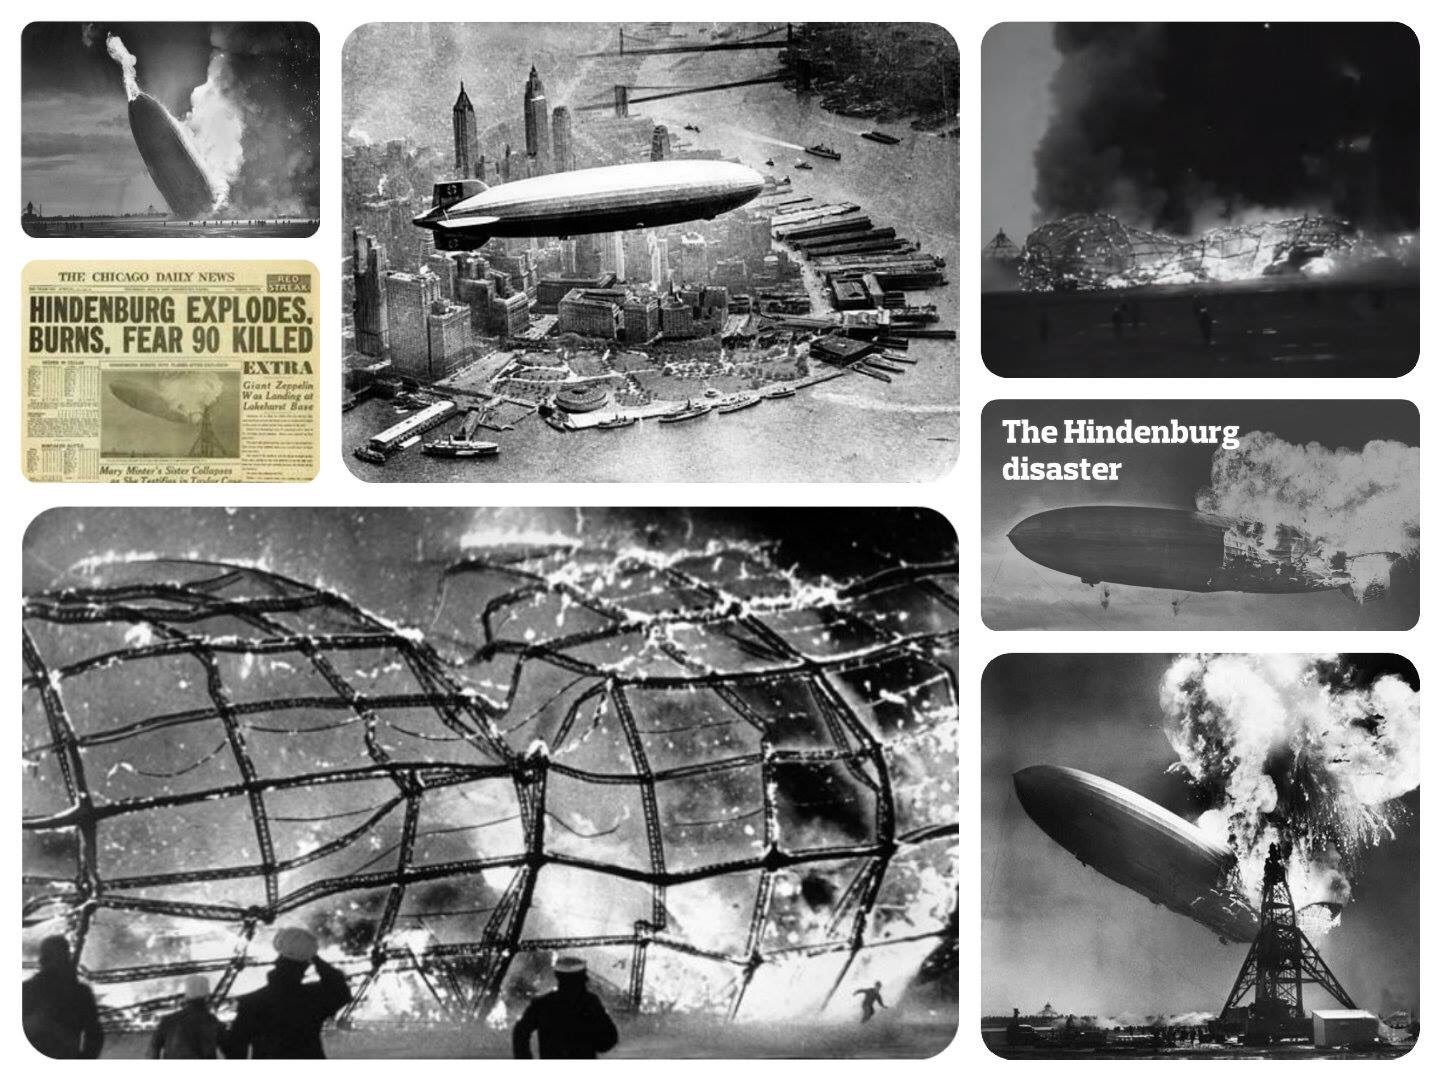 Connie Landro on Twitter: "Today in History May 6th 1937 - The Hindenburg disaster The airship Hindenburg, the largest dirigible ever built and the pride of Nazi Germany, bursts into flames upon